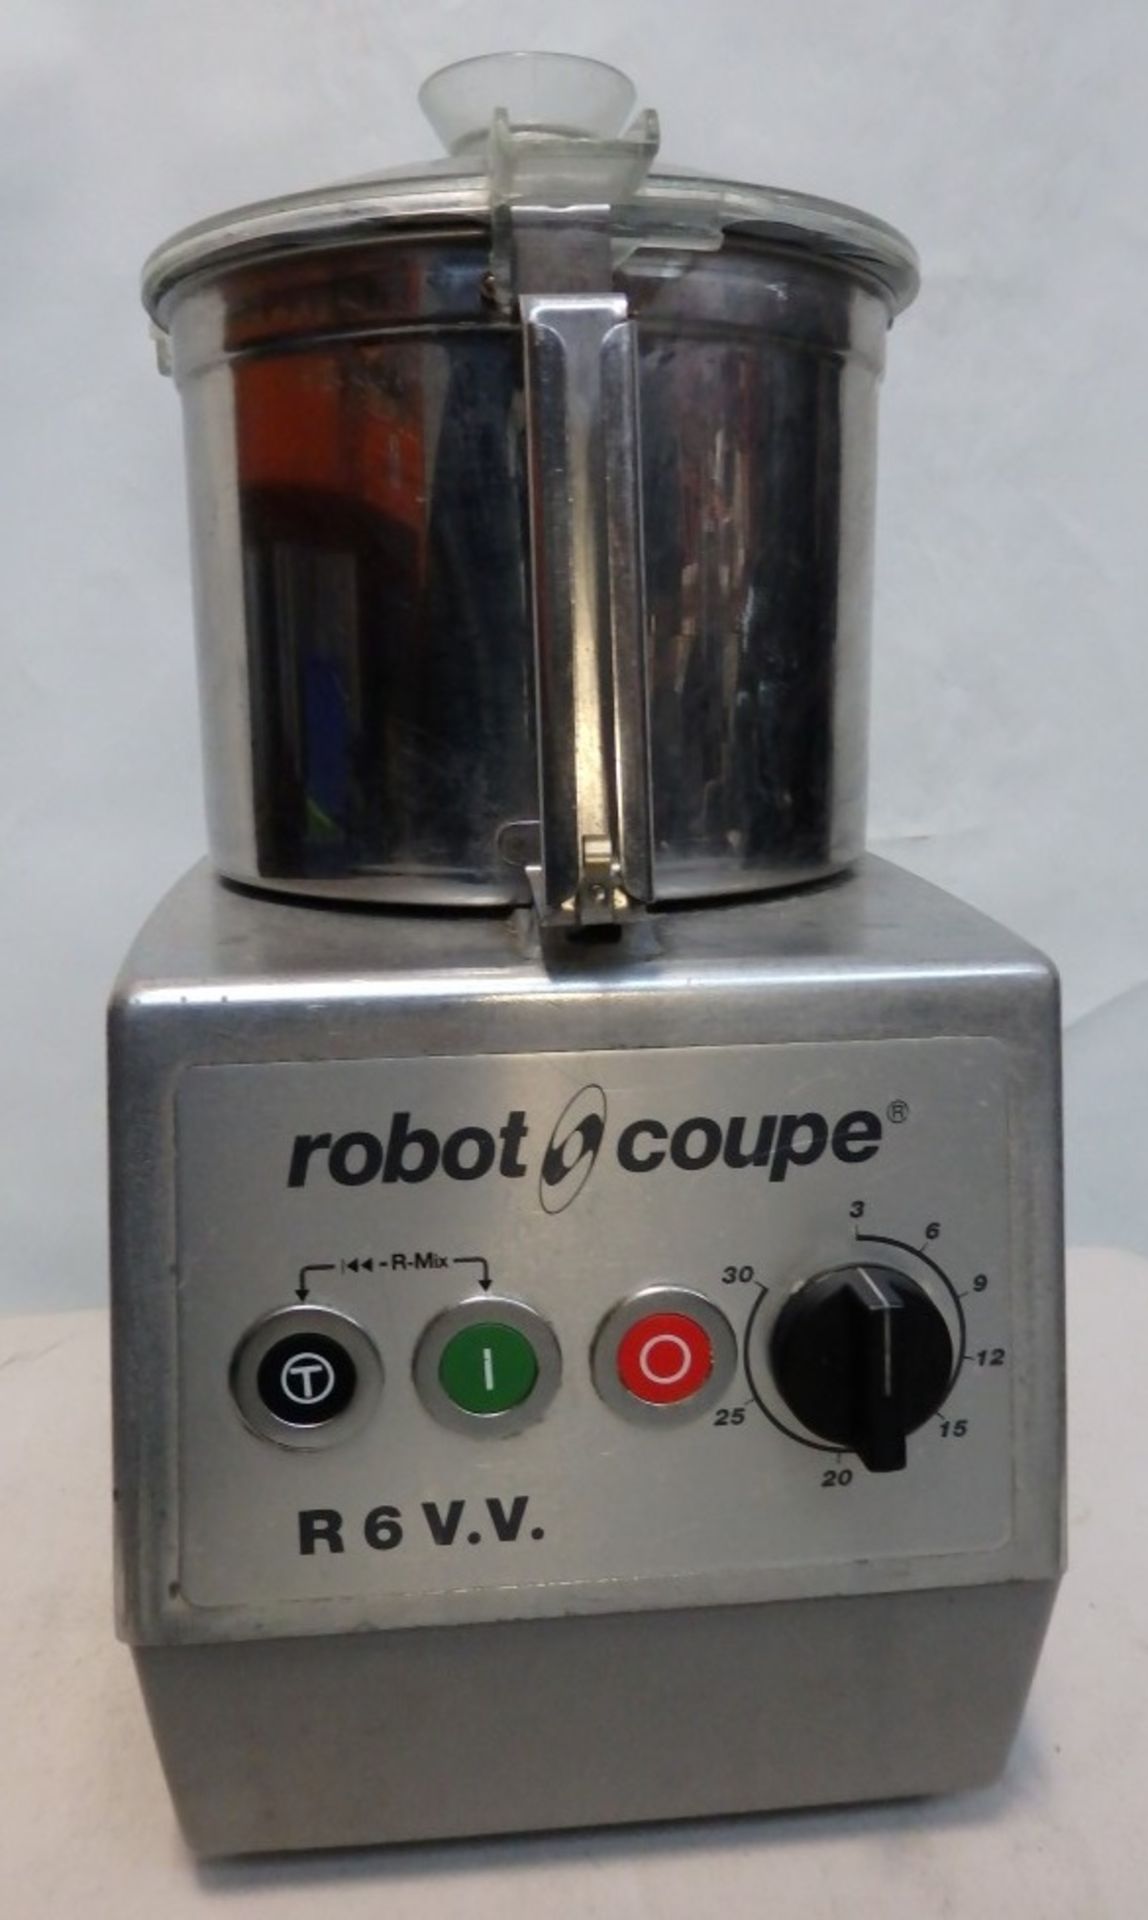 1 x "Robot Coupe" Table-Top Cutter / Mixer - Model: R6 V.V. - 1500 Watts,  Single-phase - Bowl